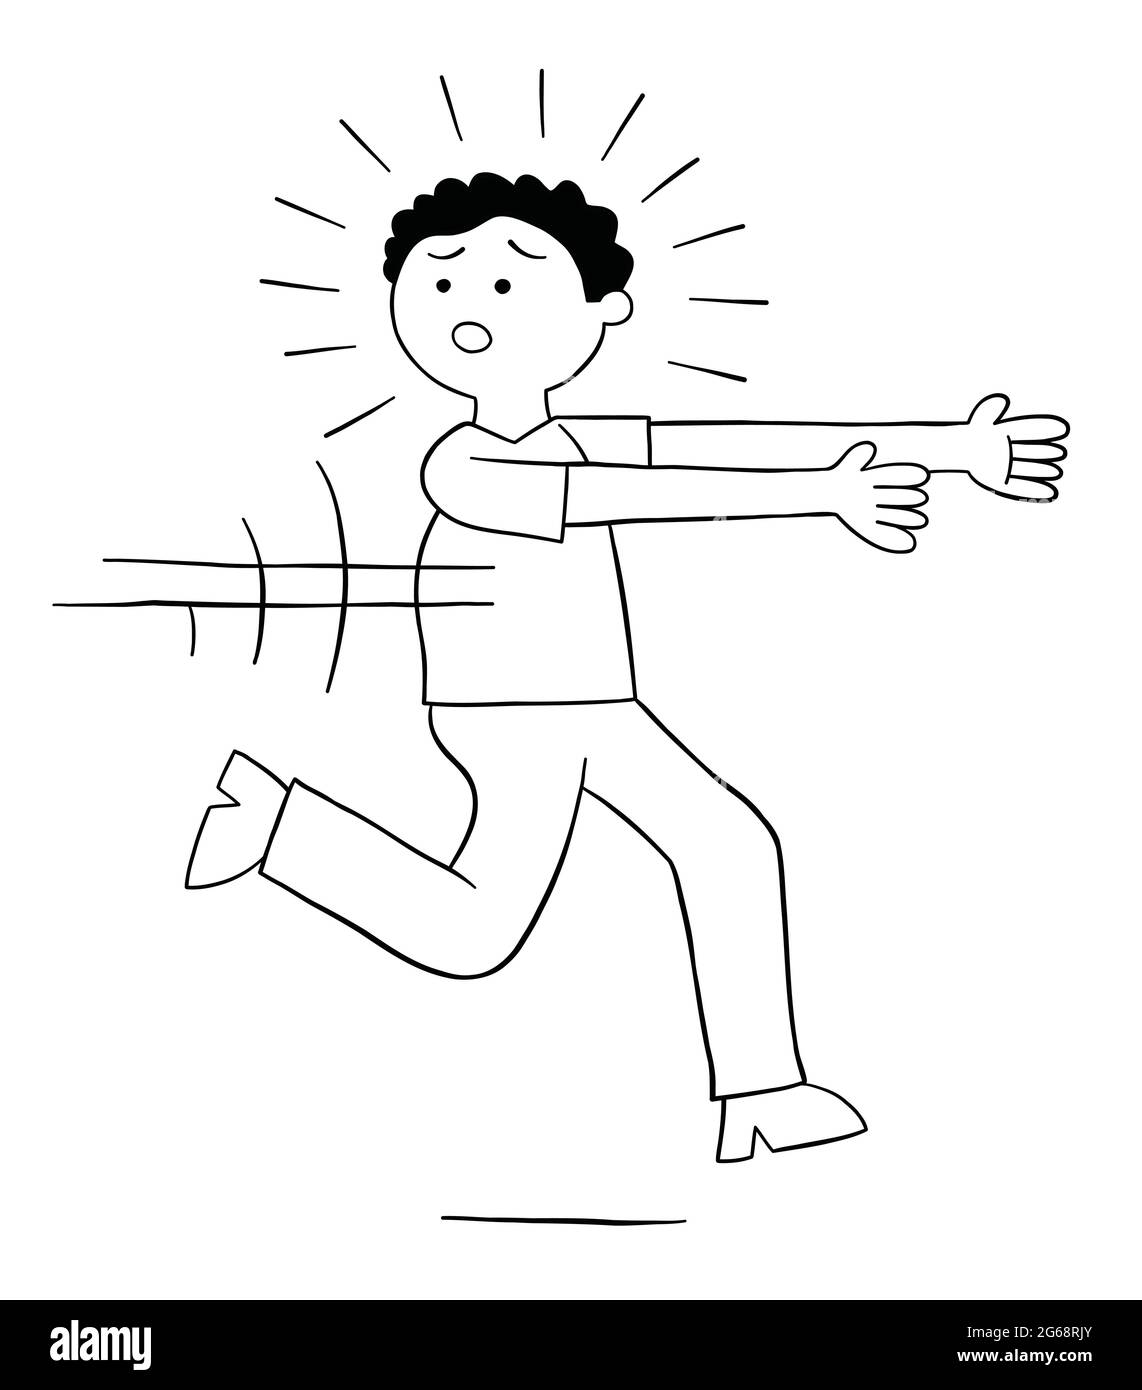 Cartoon man is afraid and runs away, vector illustration. Black outlined and white colored. Stock Vector